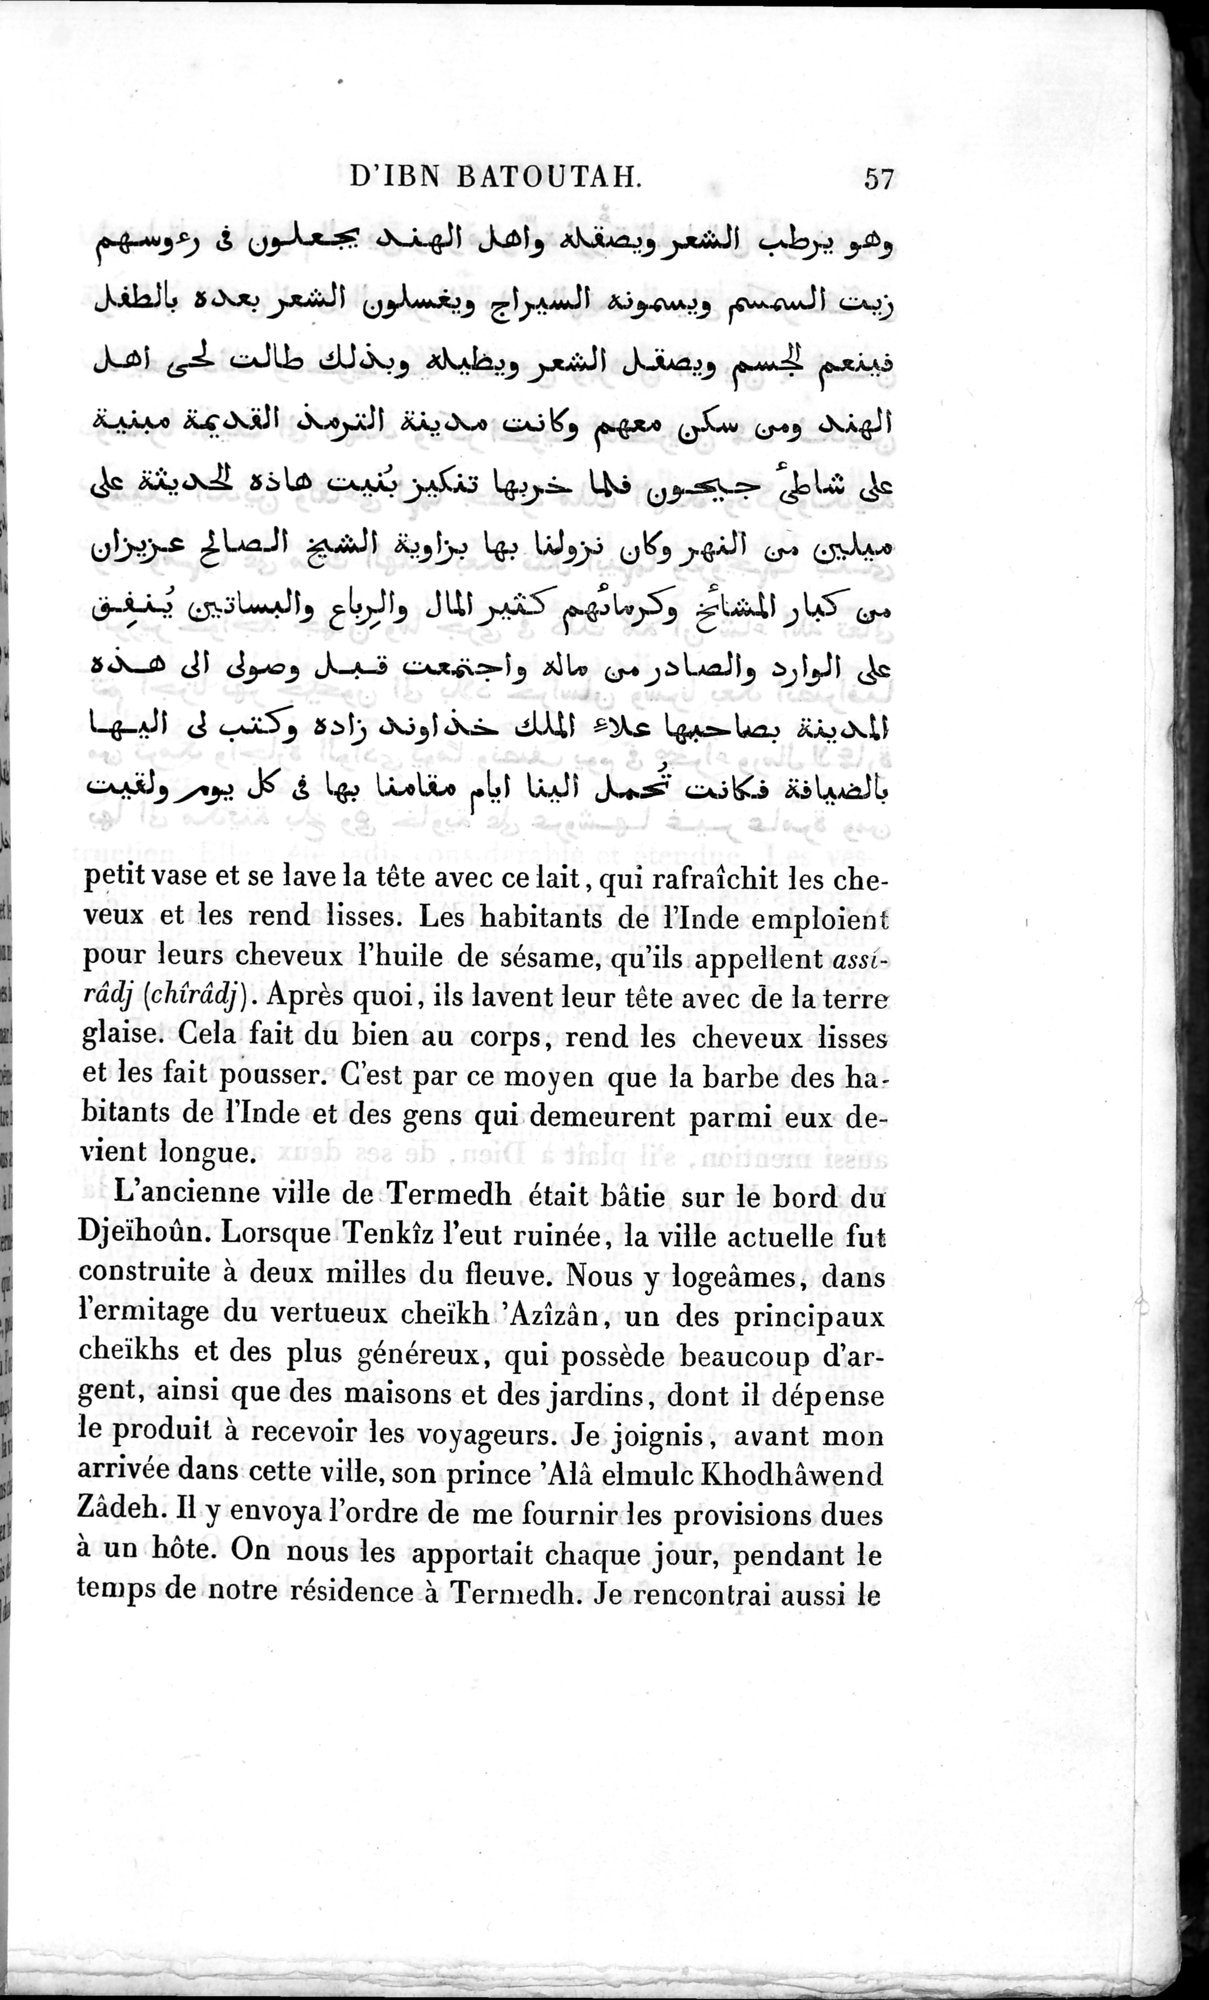 Voyages d'Ibn Batoutah : vol.3 / Page 97 (Grayscale High Resolution Image)